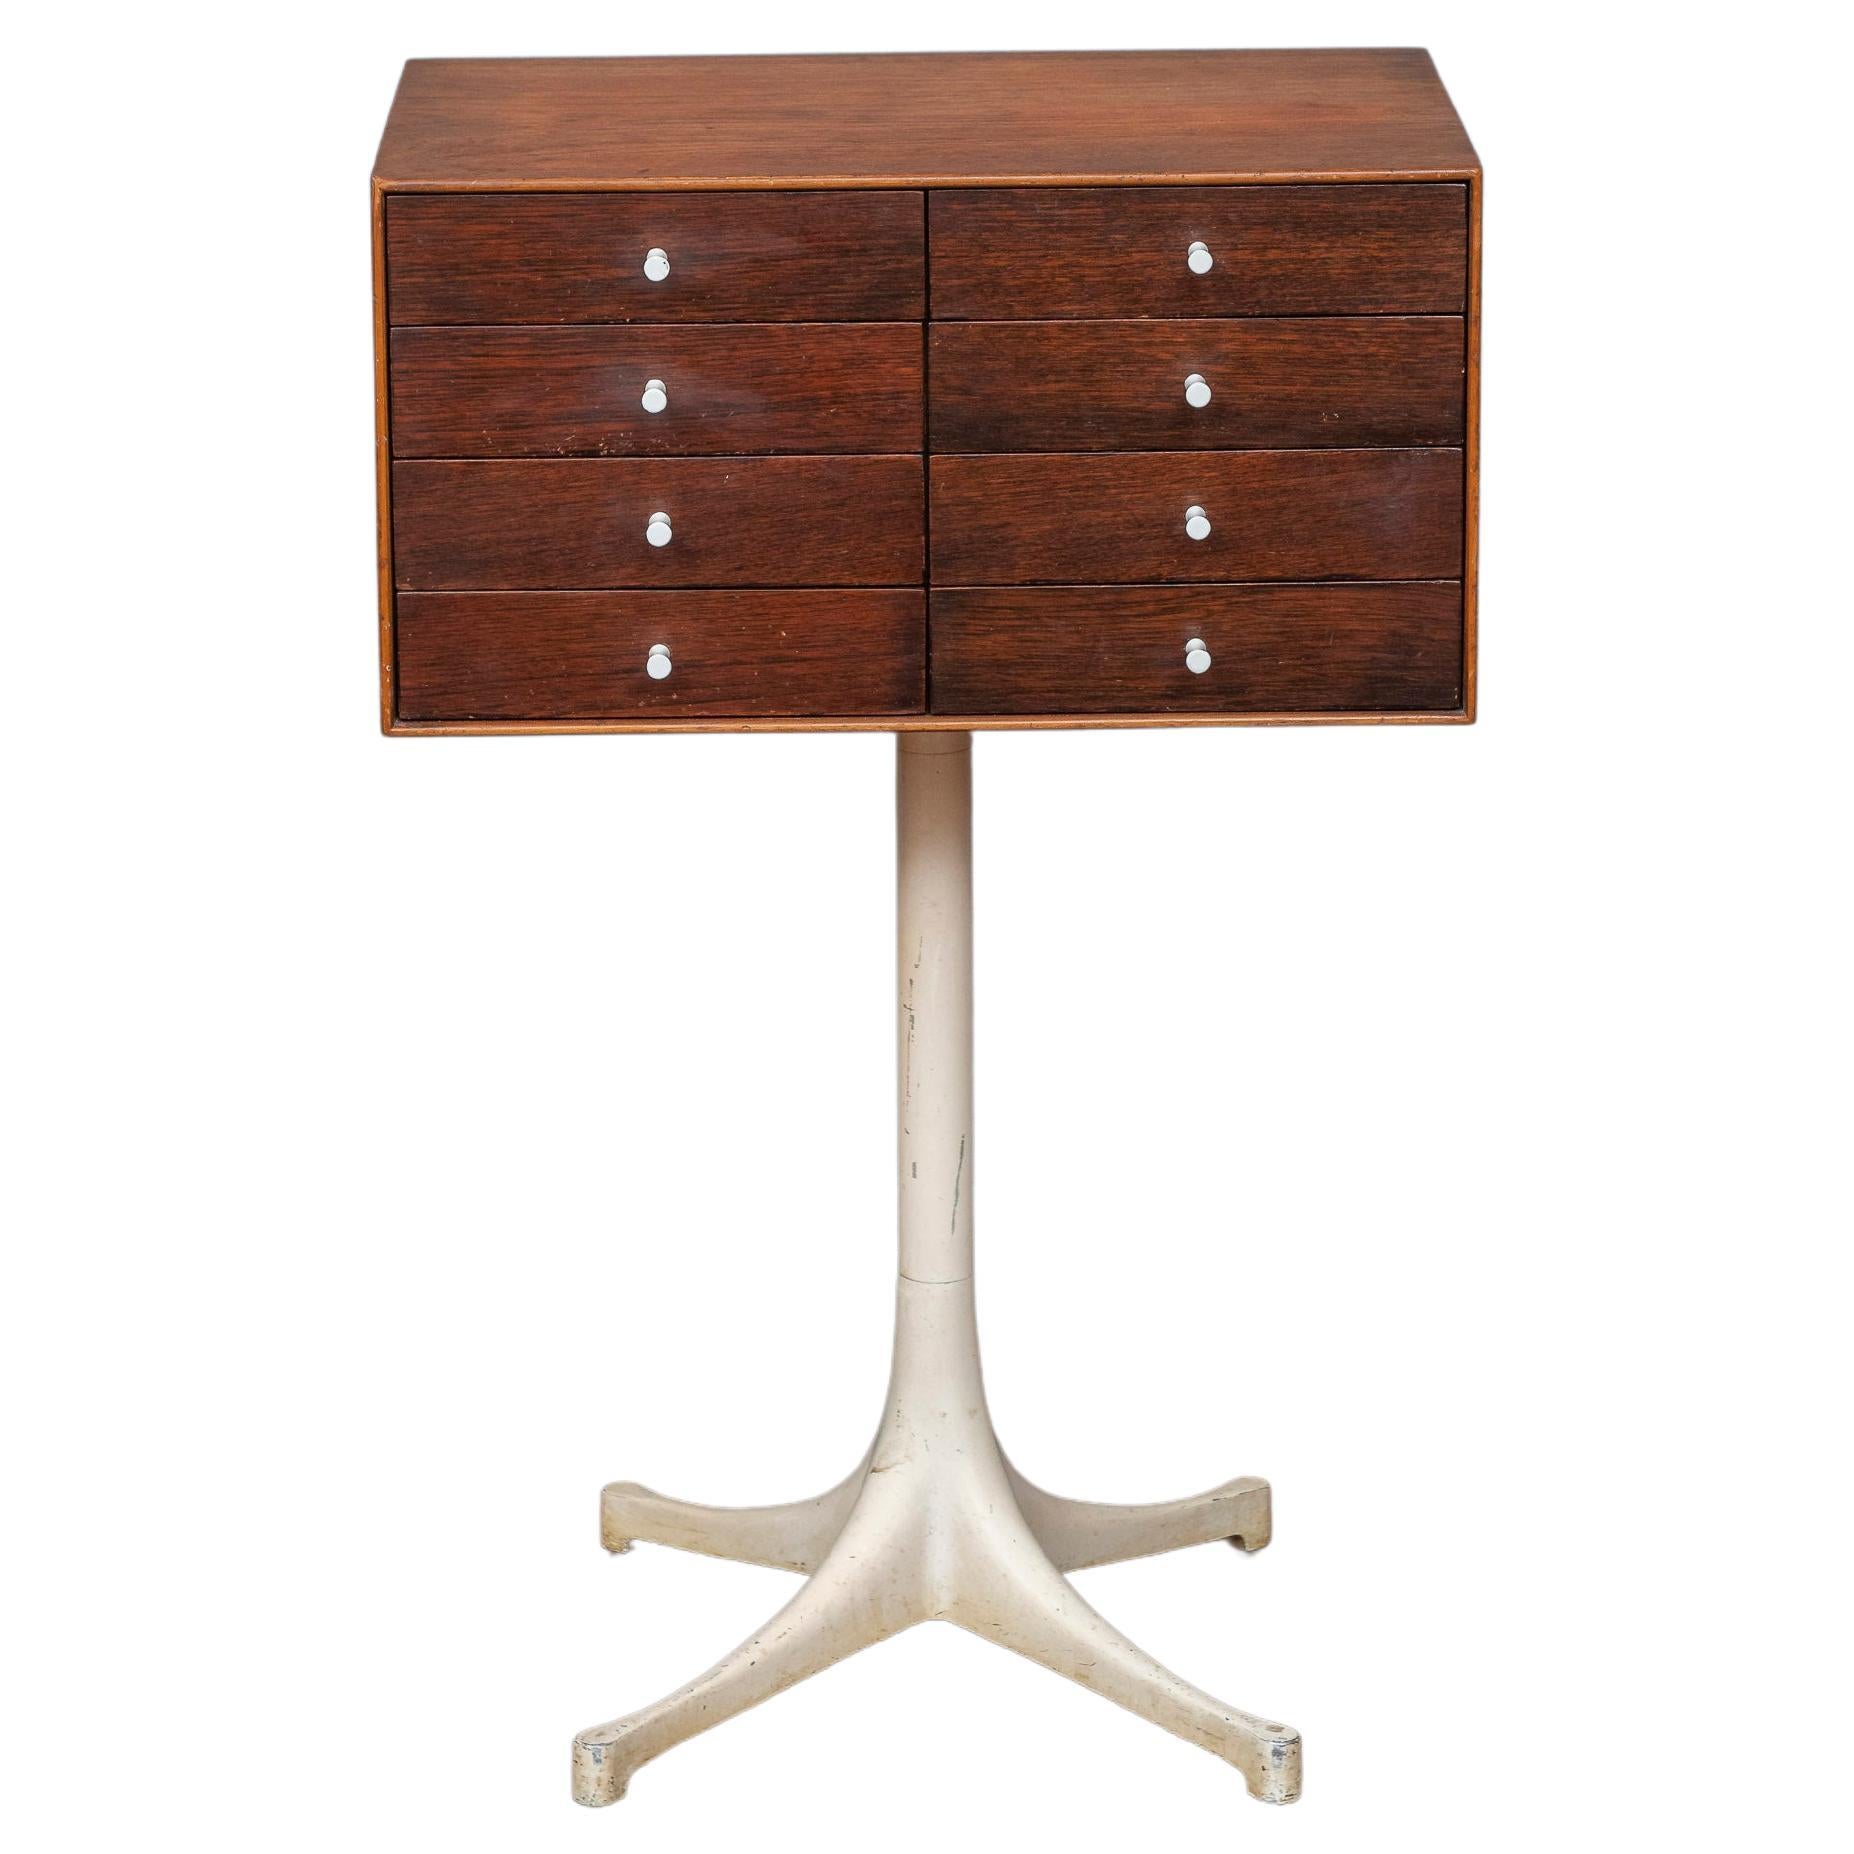 George Nelson Jewelry Cabinet for Herman Miller